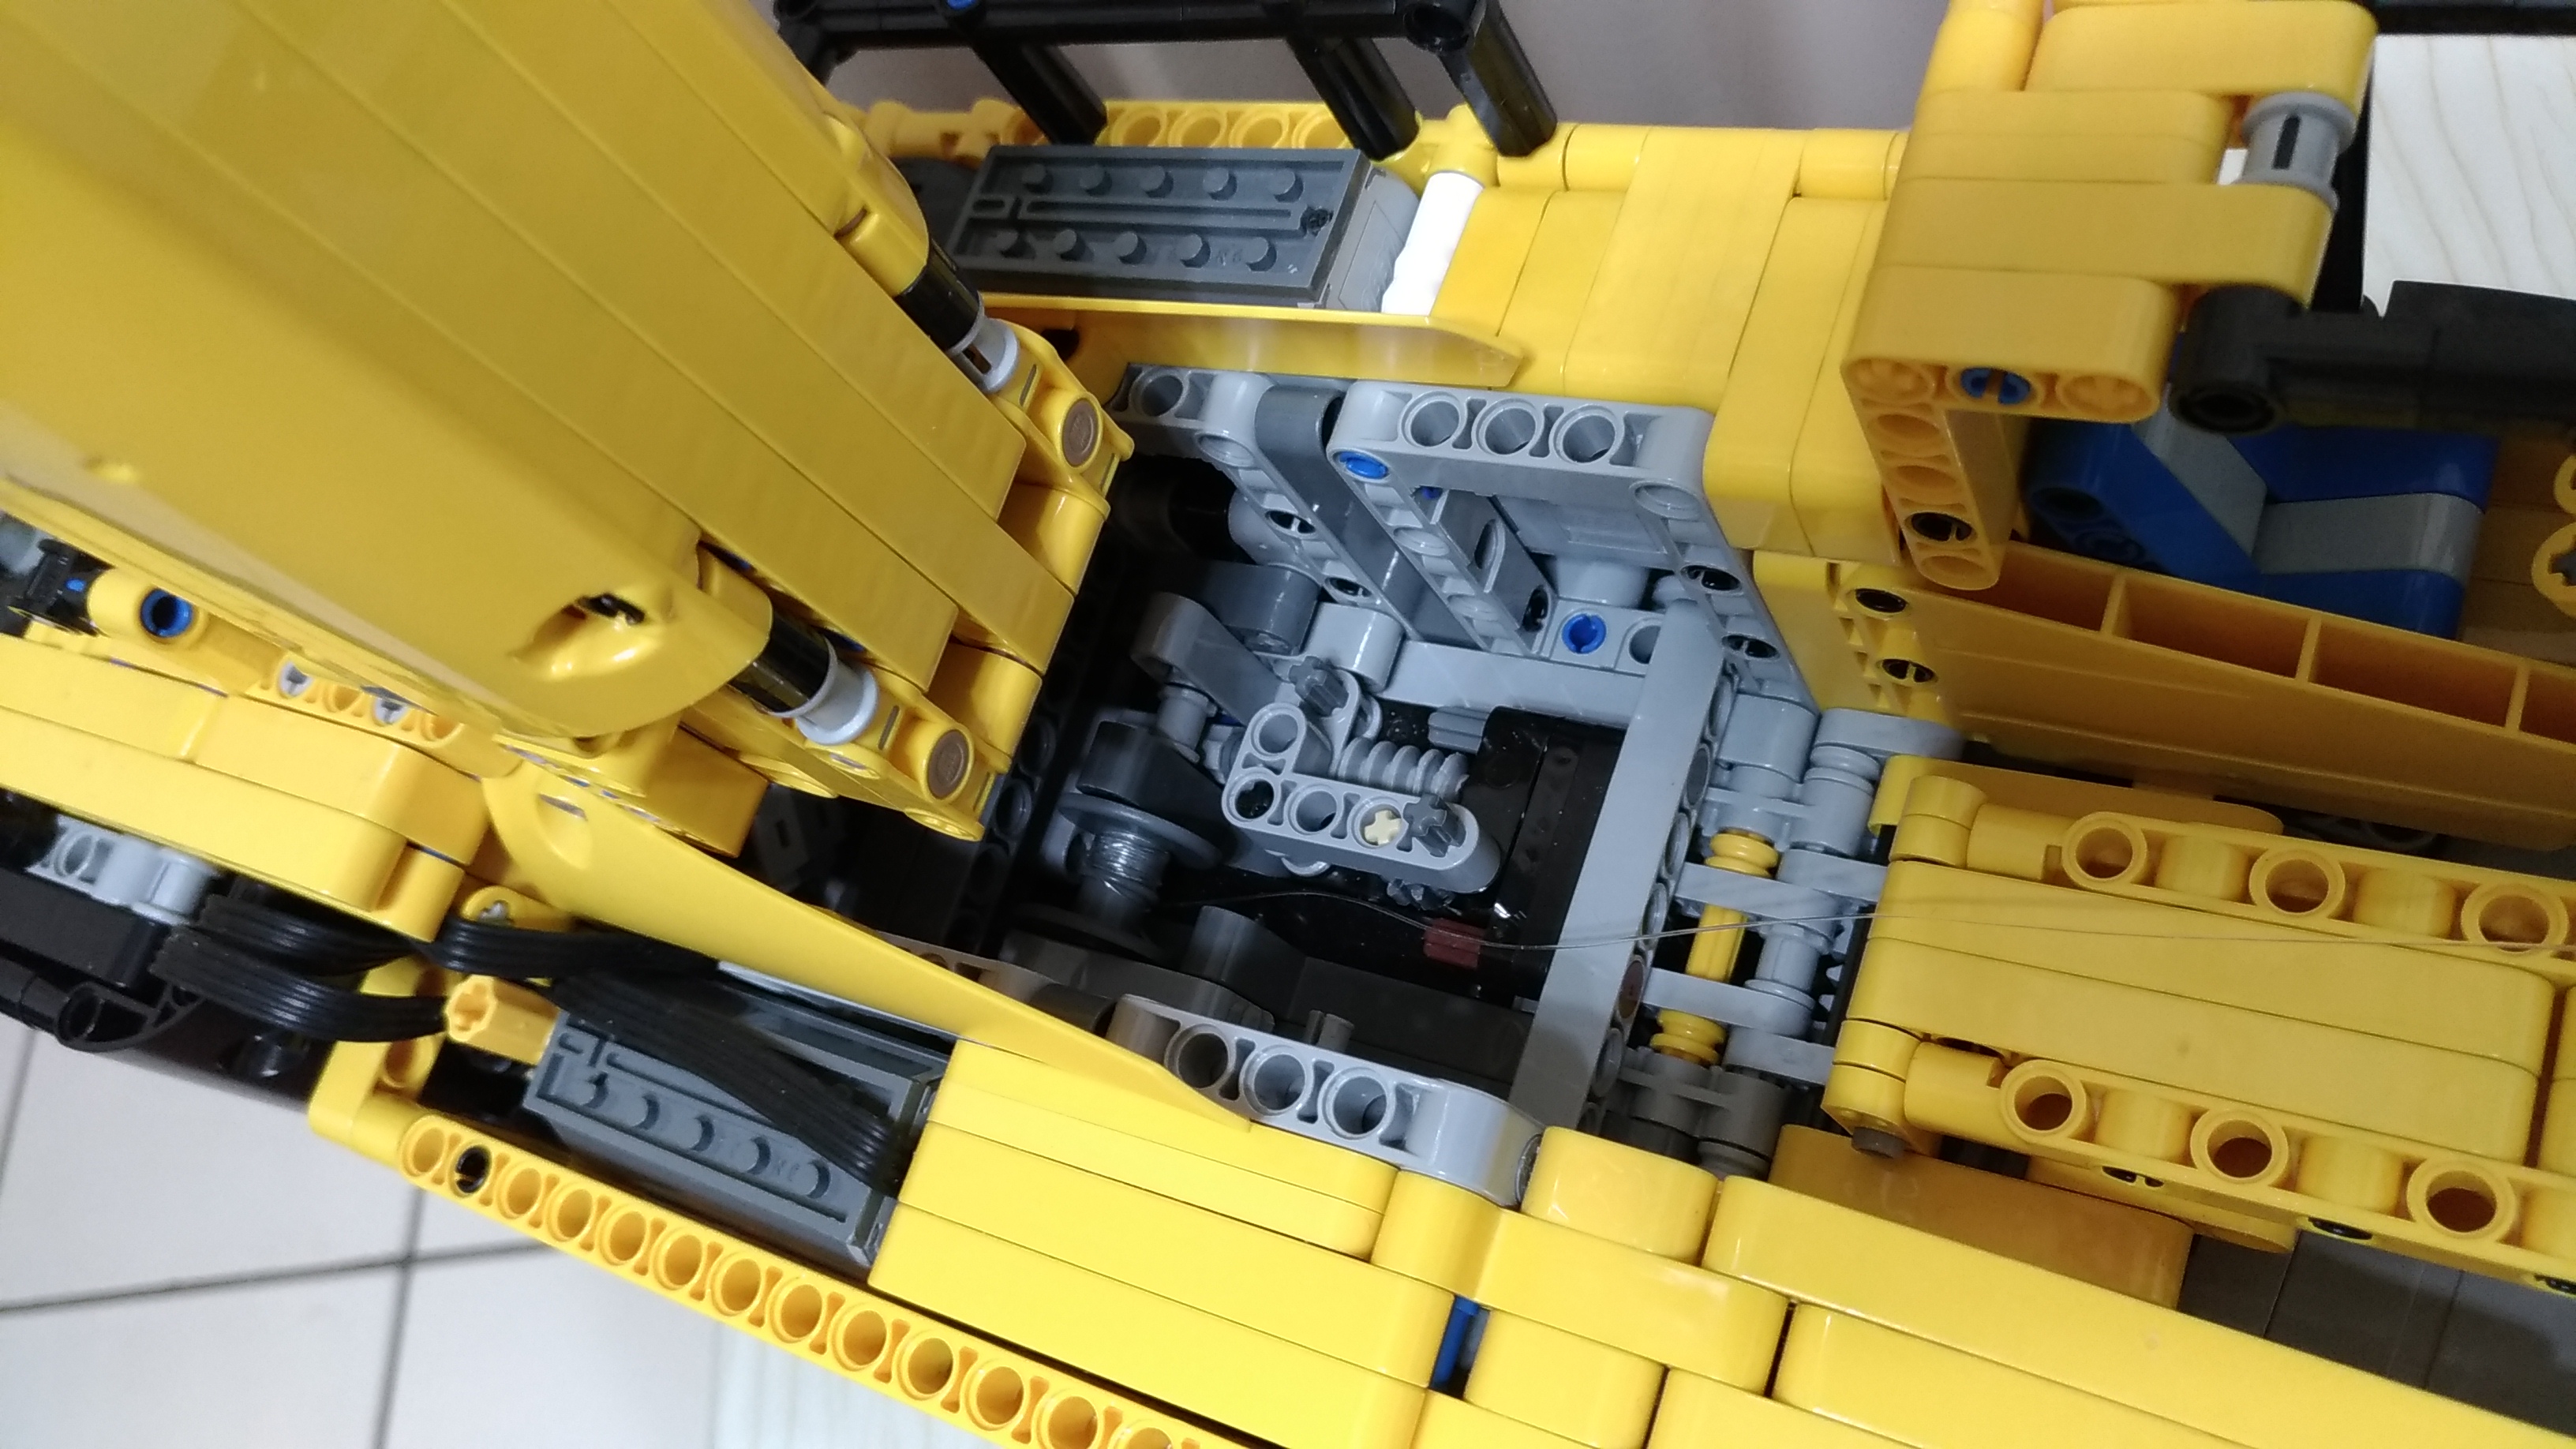 MOC REVIEW] Grove GMK6400 Mobile Crane - Page 30 - LEGO Technic,  Mindstorms, Model Team and Scale Modeling - Eurobricks Forums